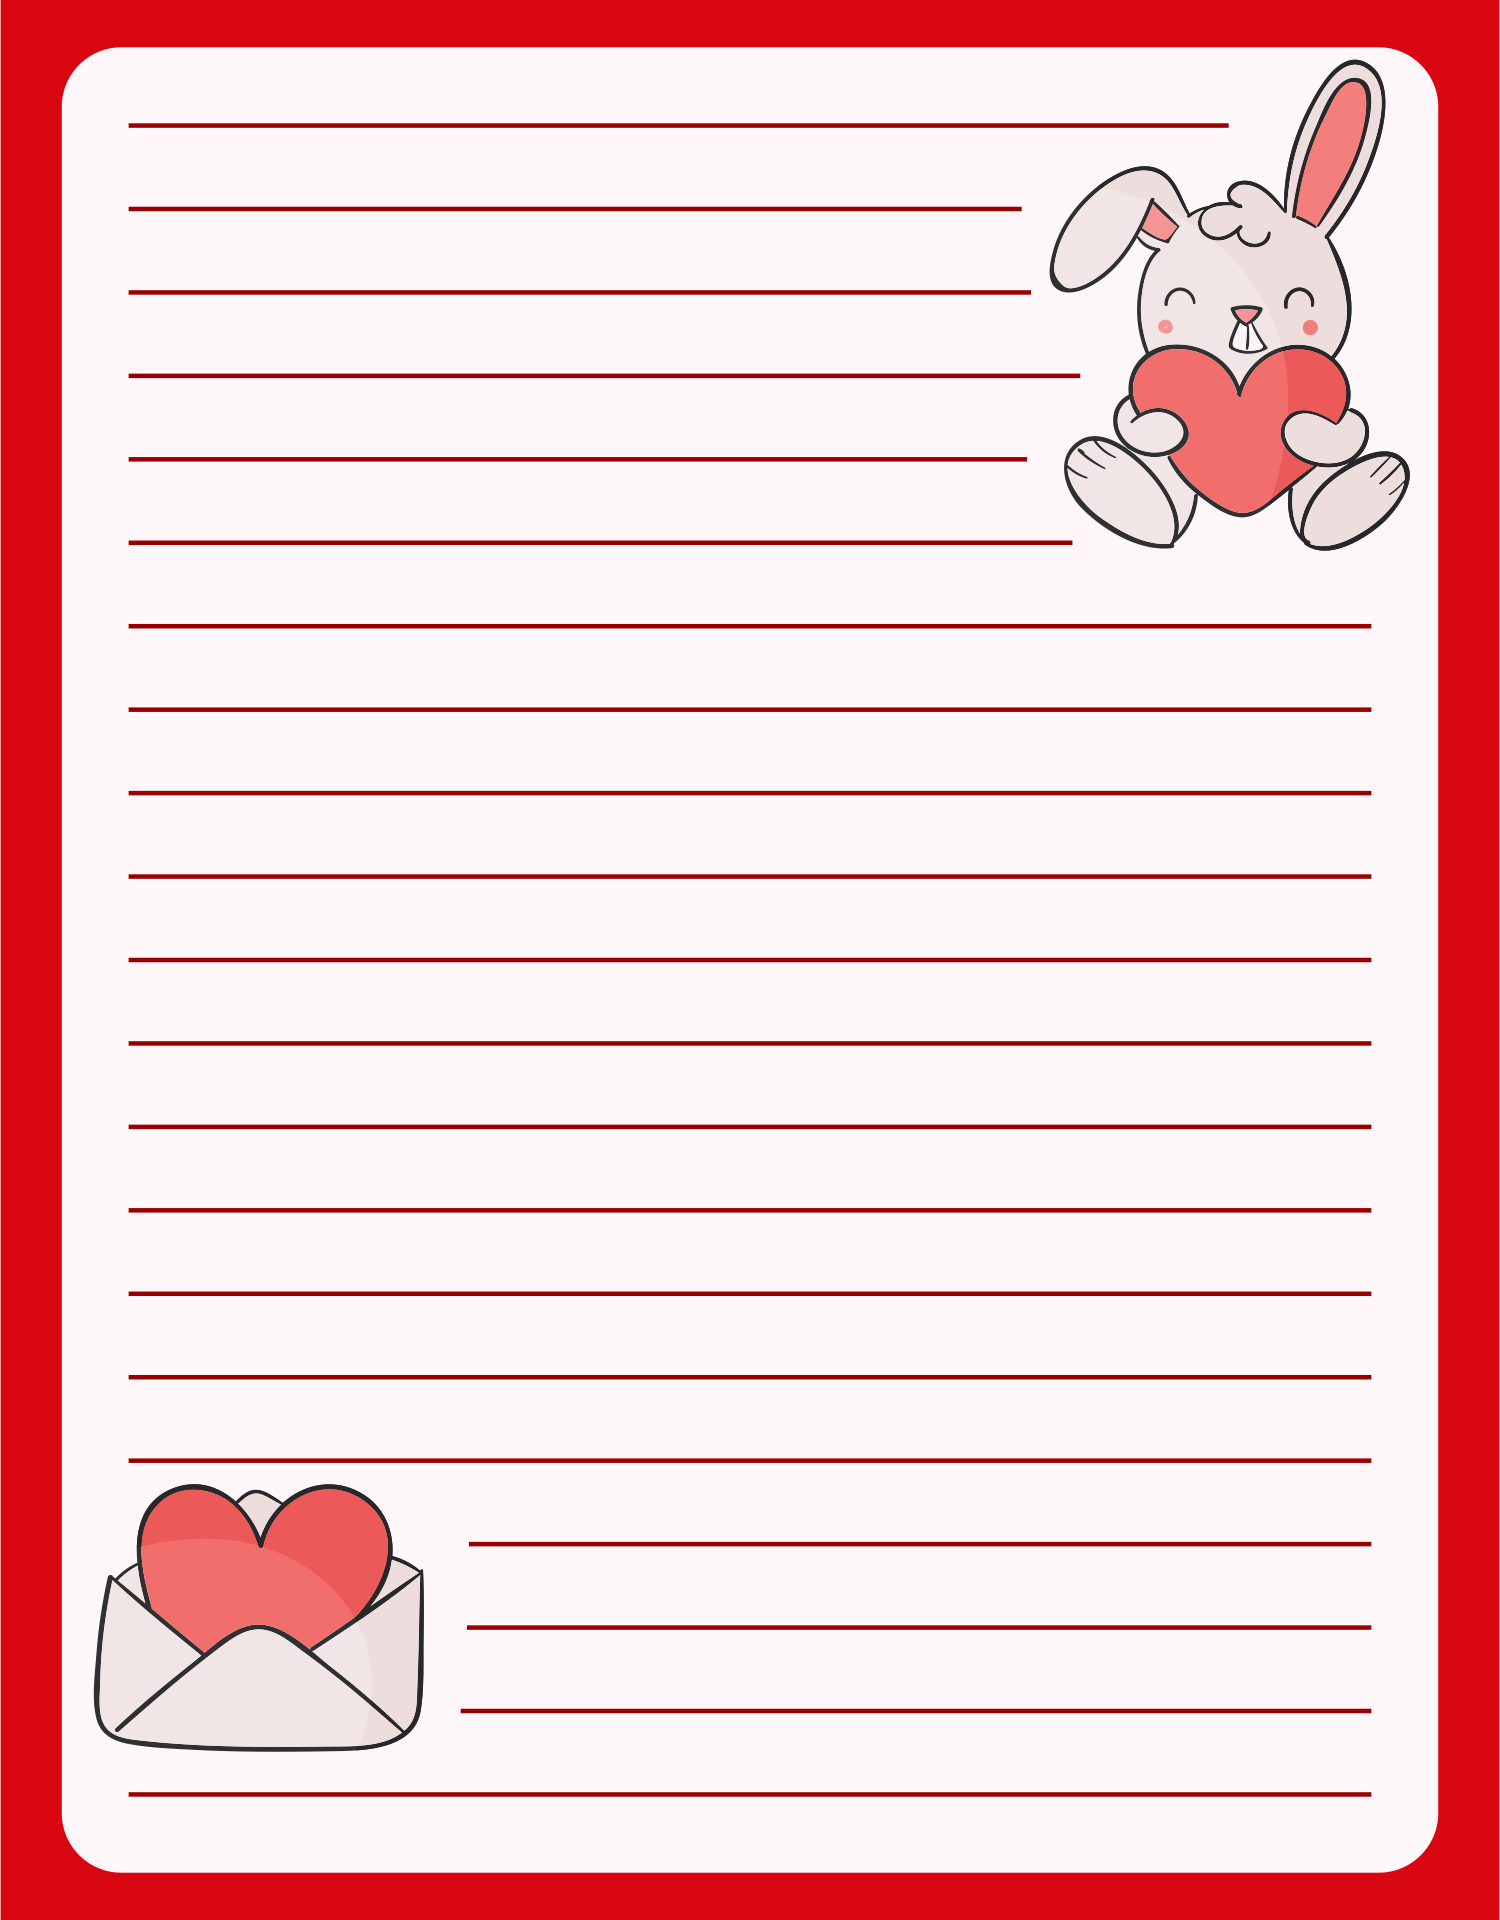 printable-letter-paper-printable-templates